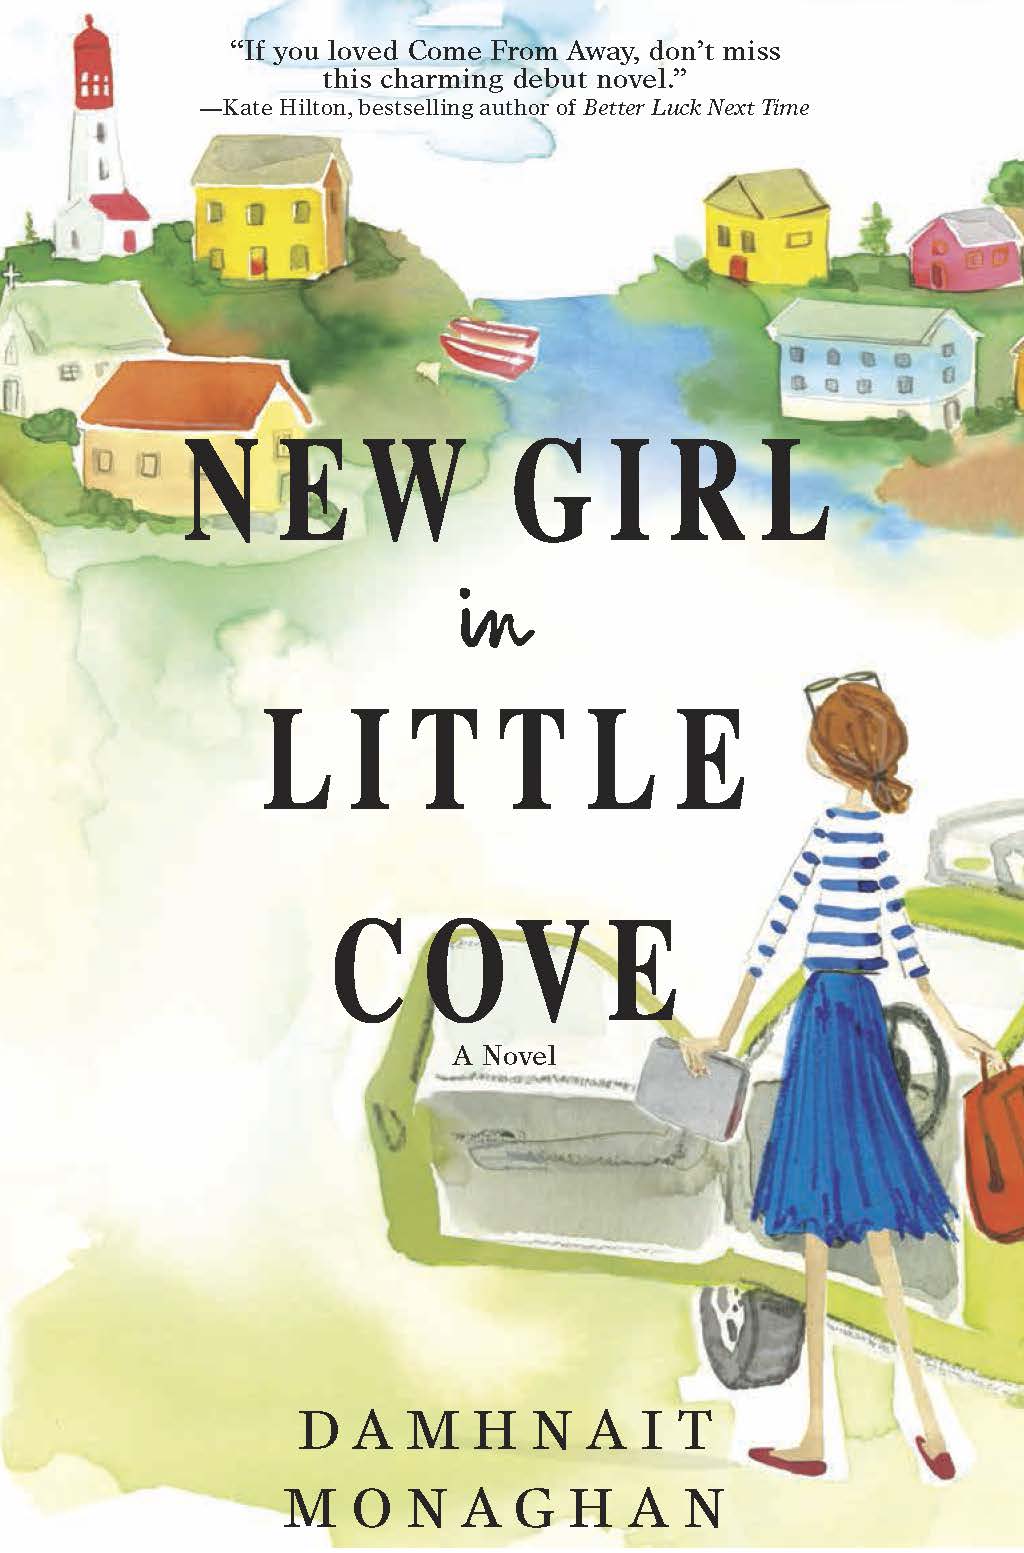 Review: The New Girl in Little Cove by Damhnait Monaghan